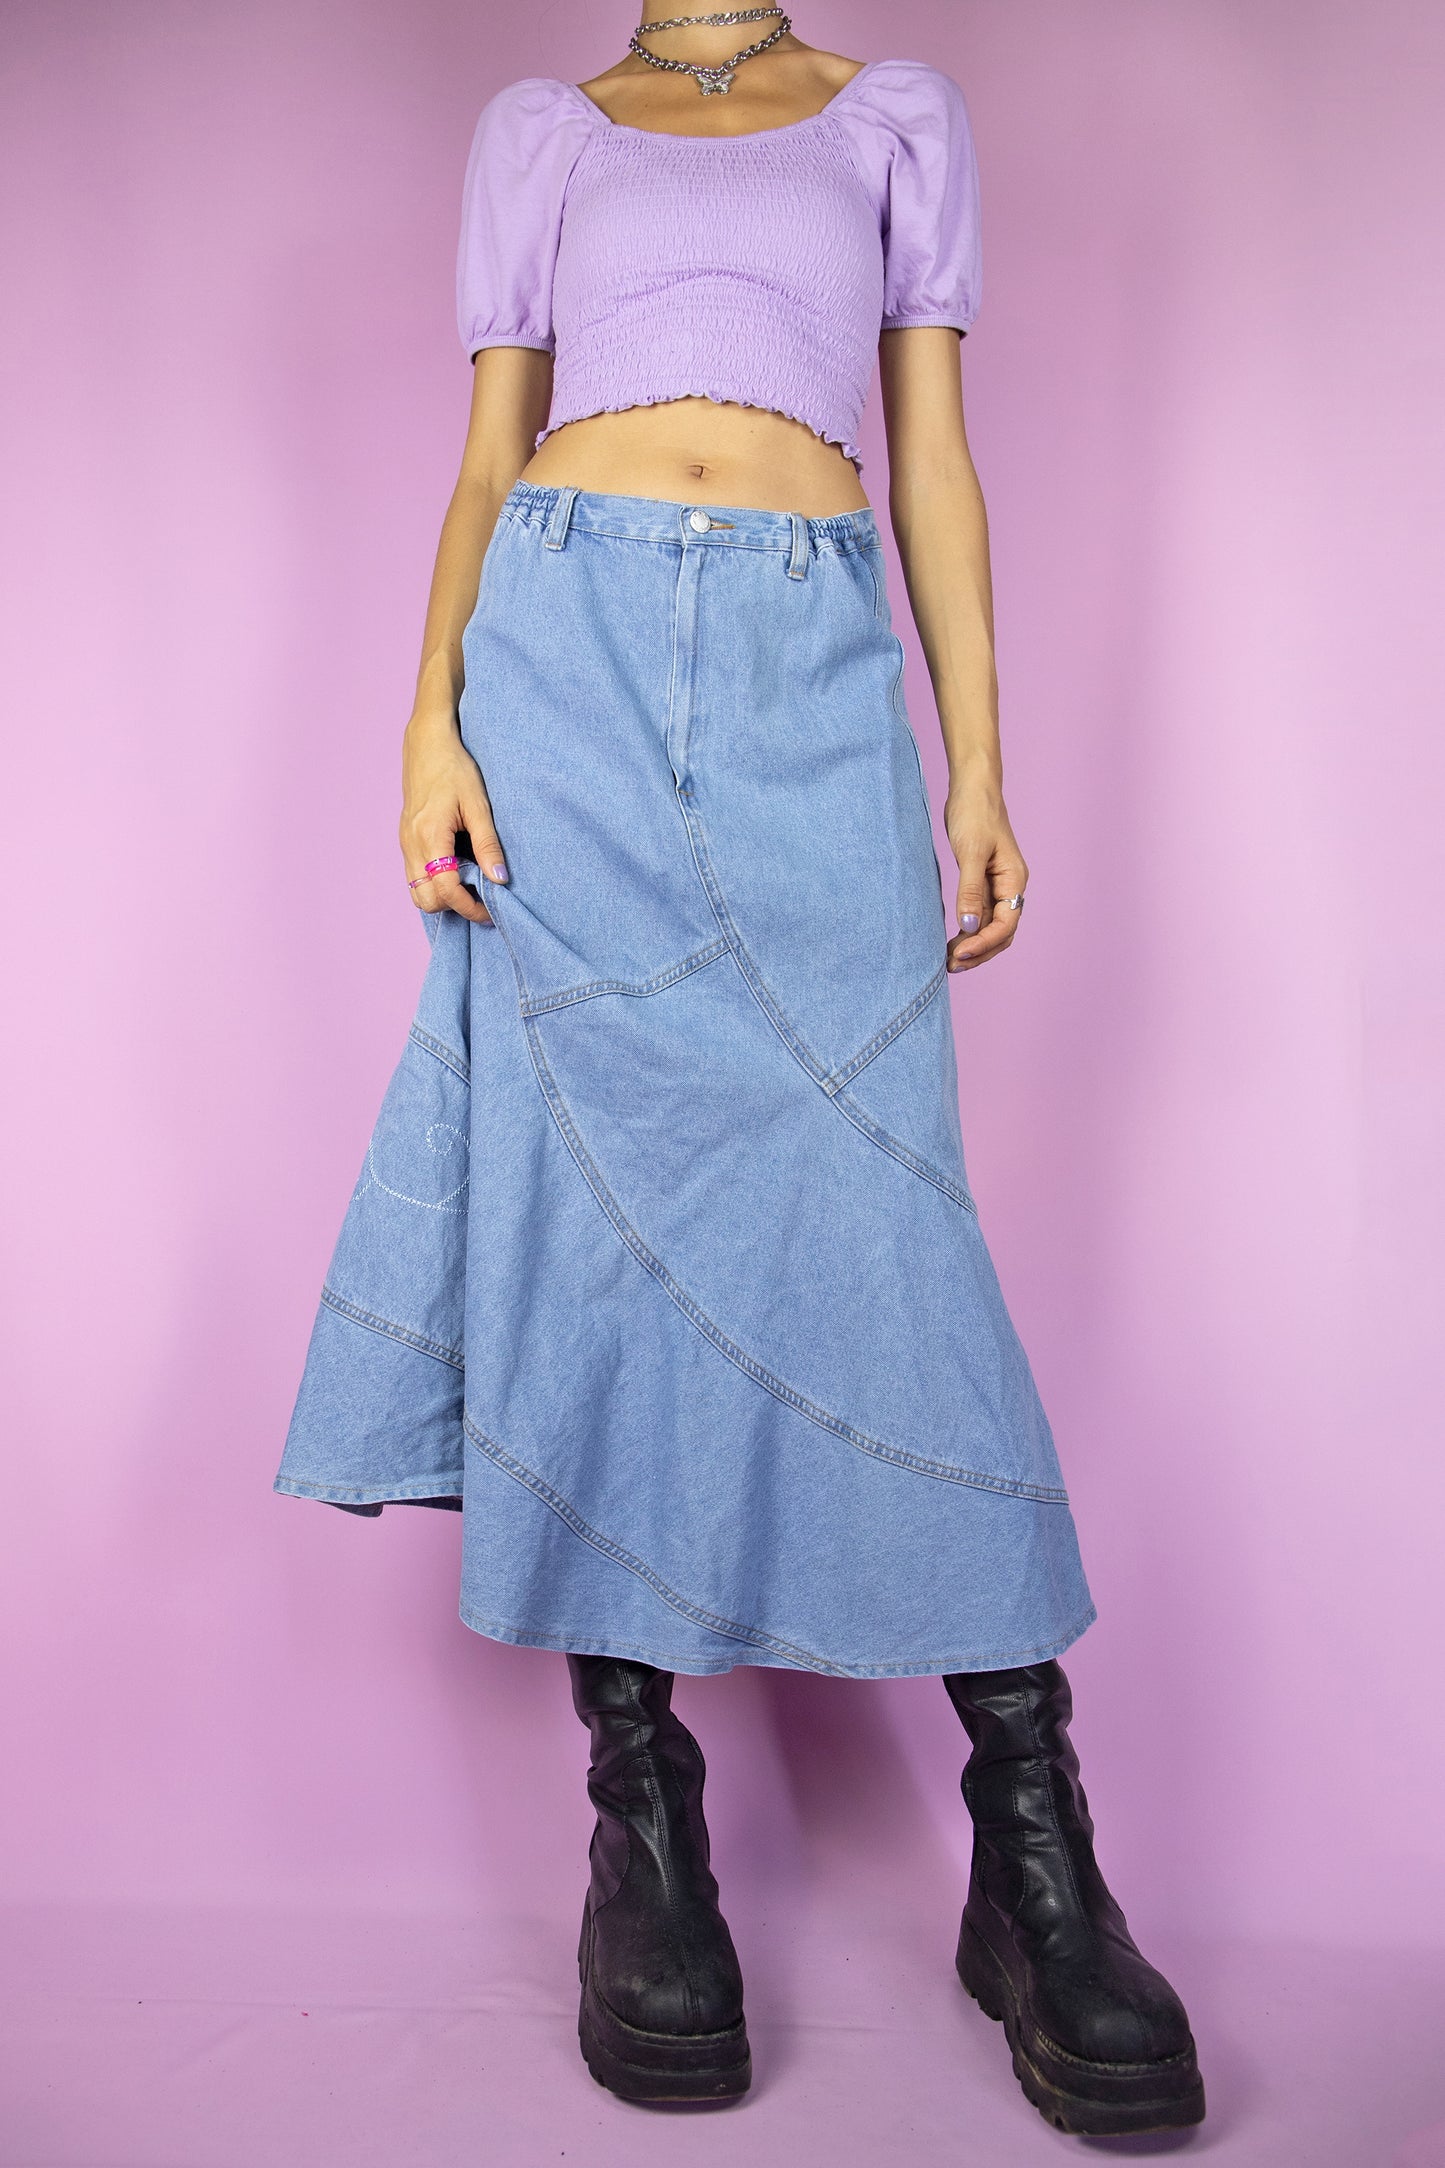 The Y2K Denim Trumpet Midi Skirt is a vintage skirt adorned with embroidered floral details. Cyber grunge 2000s jean maxi skirt.